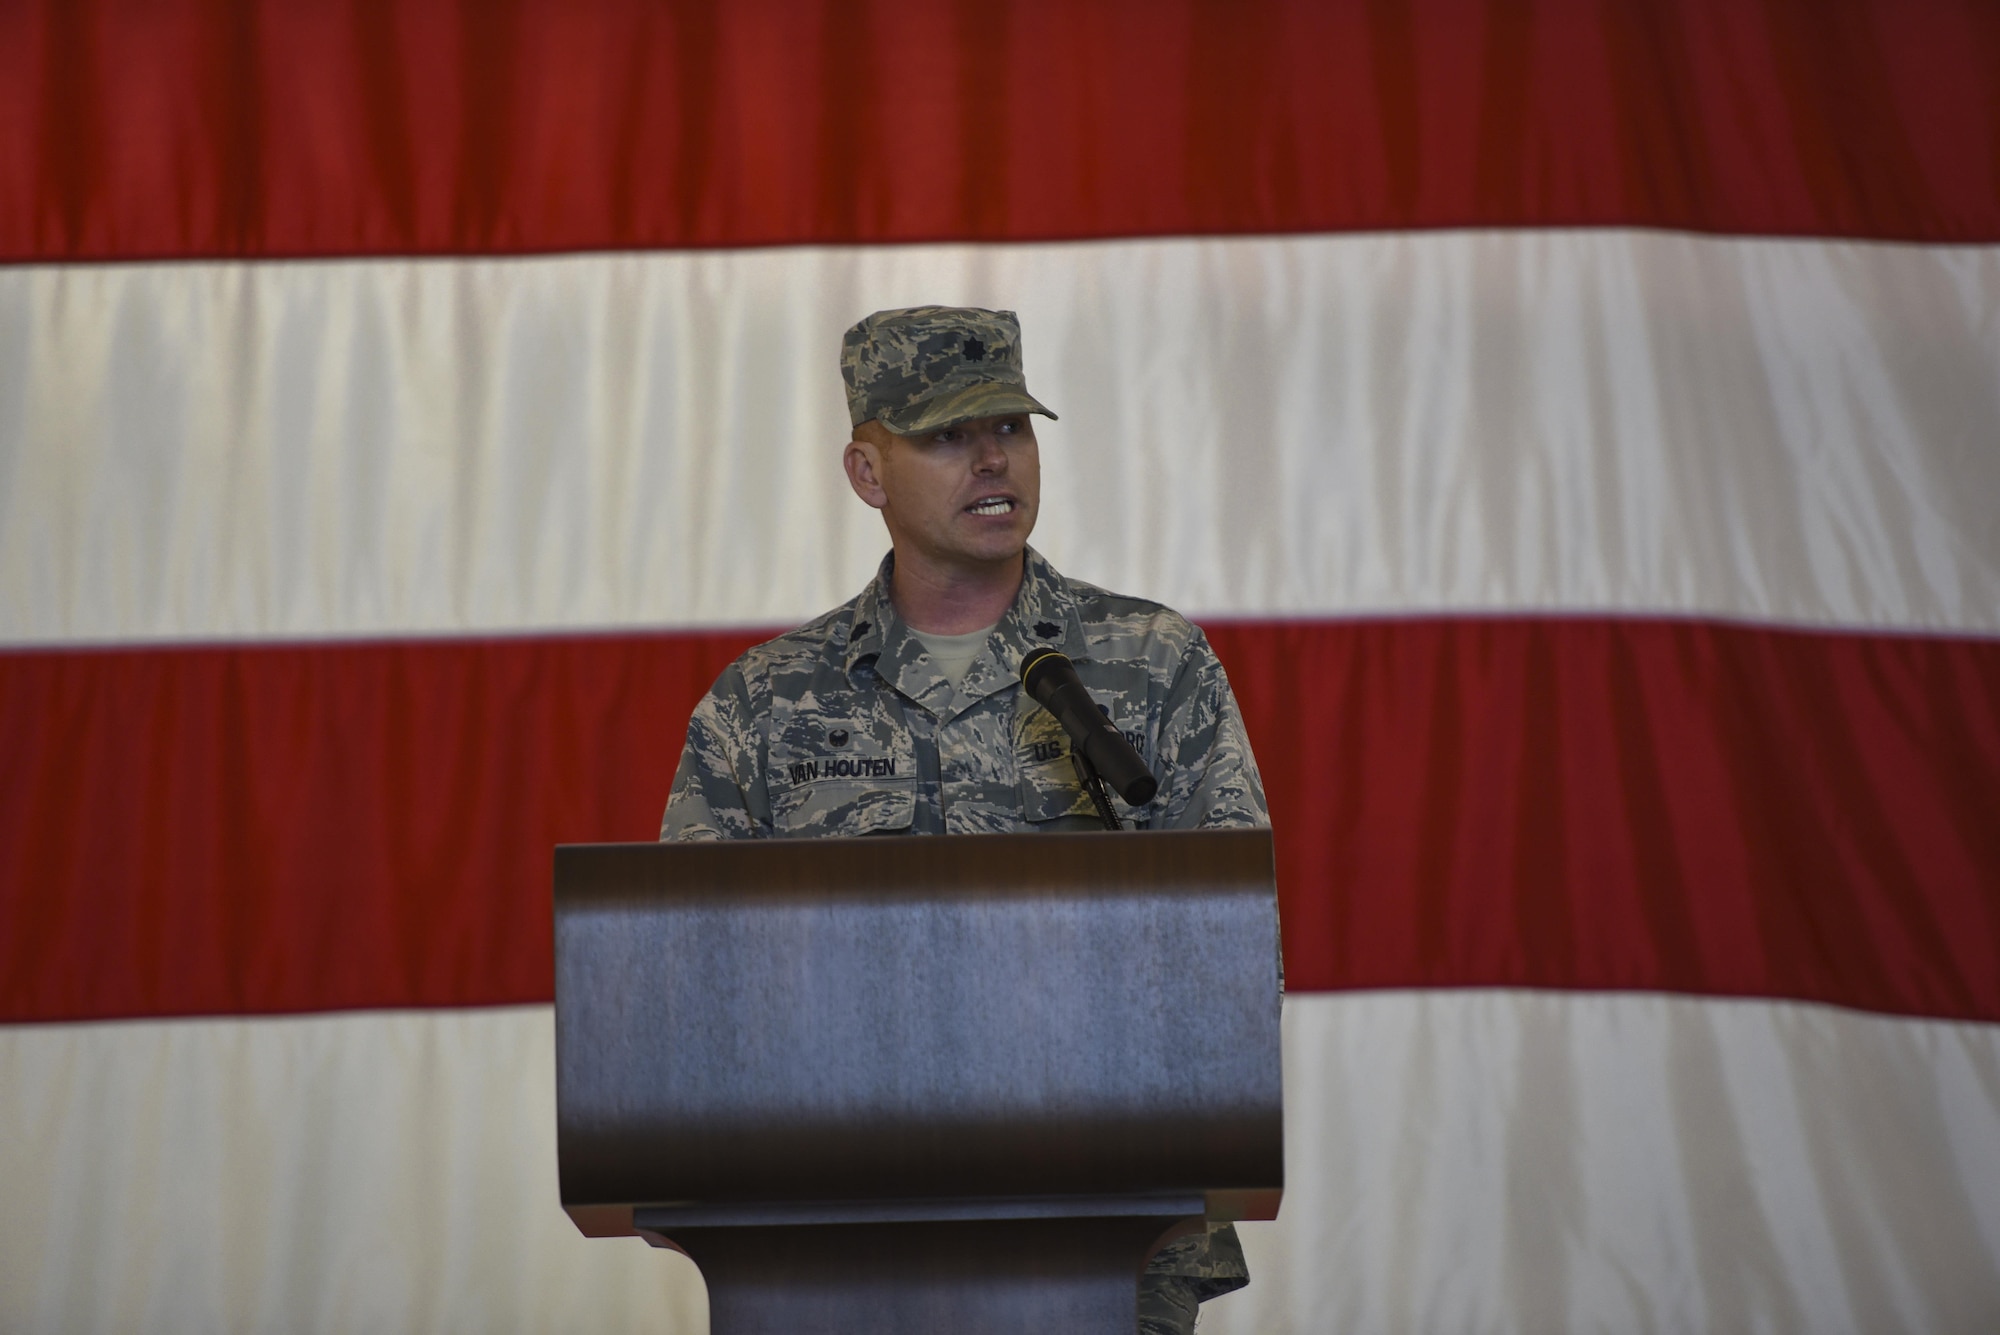 Lt. Col. Neal Van Houten, 23d Maintenance Squadron commander, commends 23d MXS Airmen for their maintenance professionalism and expertise during a re-designation ceremony, Nov. 9, 2017, at Moody Air Force Base, Ga. Van Houten took command of Air Combat Command’s second largest squadron, leading the 800 men and women who are responsible for executing safe and reliable maintenance on aircraft systems, ground equipment and munitions to support the 23d Wing's attack and rescue missions. (U.S. Air Force photo by Senior Airman Greg Nash)